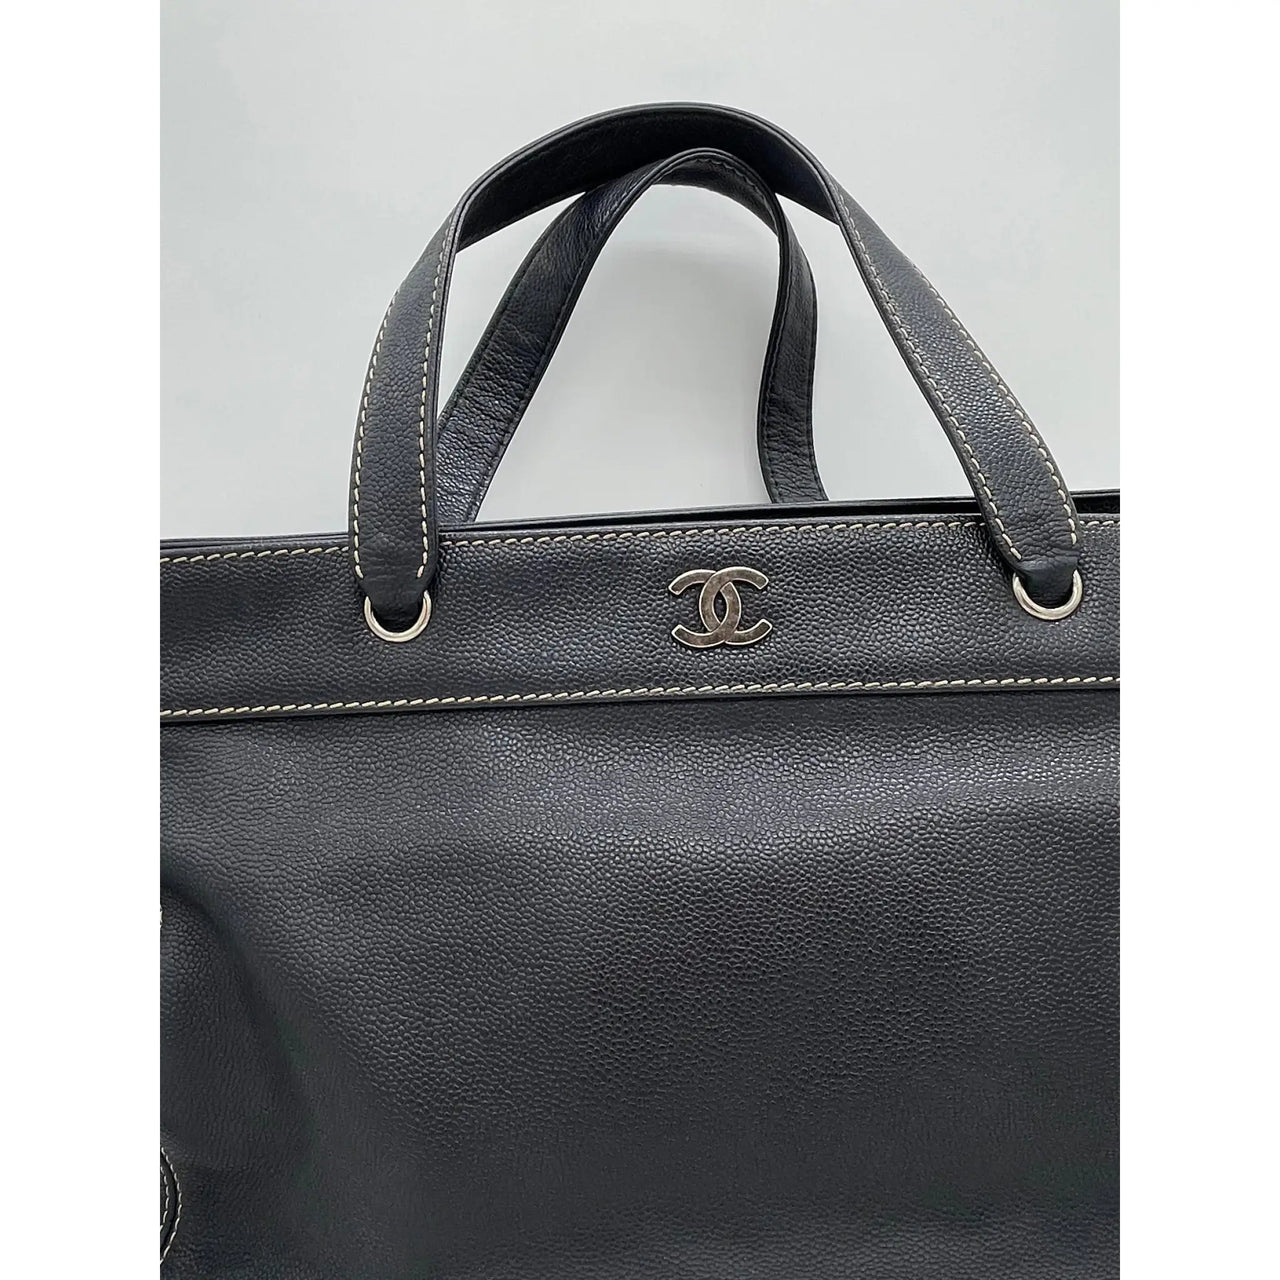 Chanel Black Caviar Leather Cerf Executive Large Tote Bag Chanel